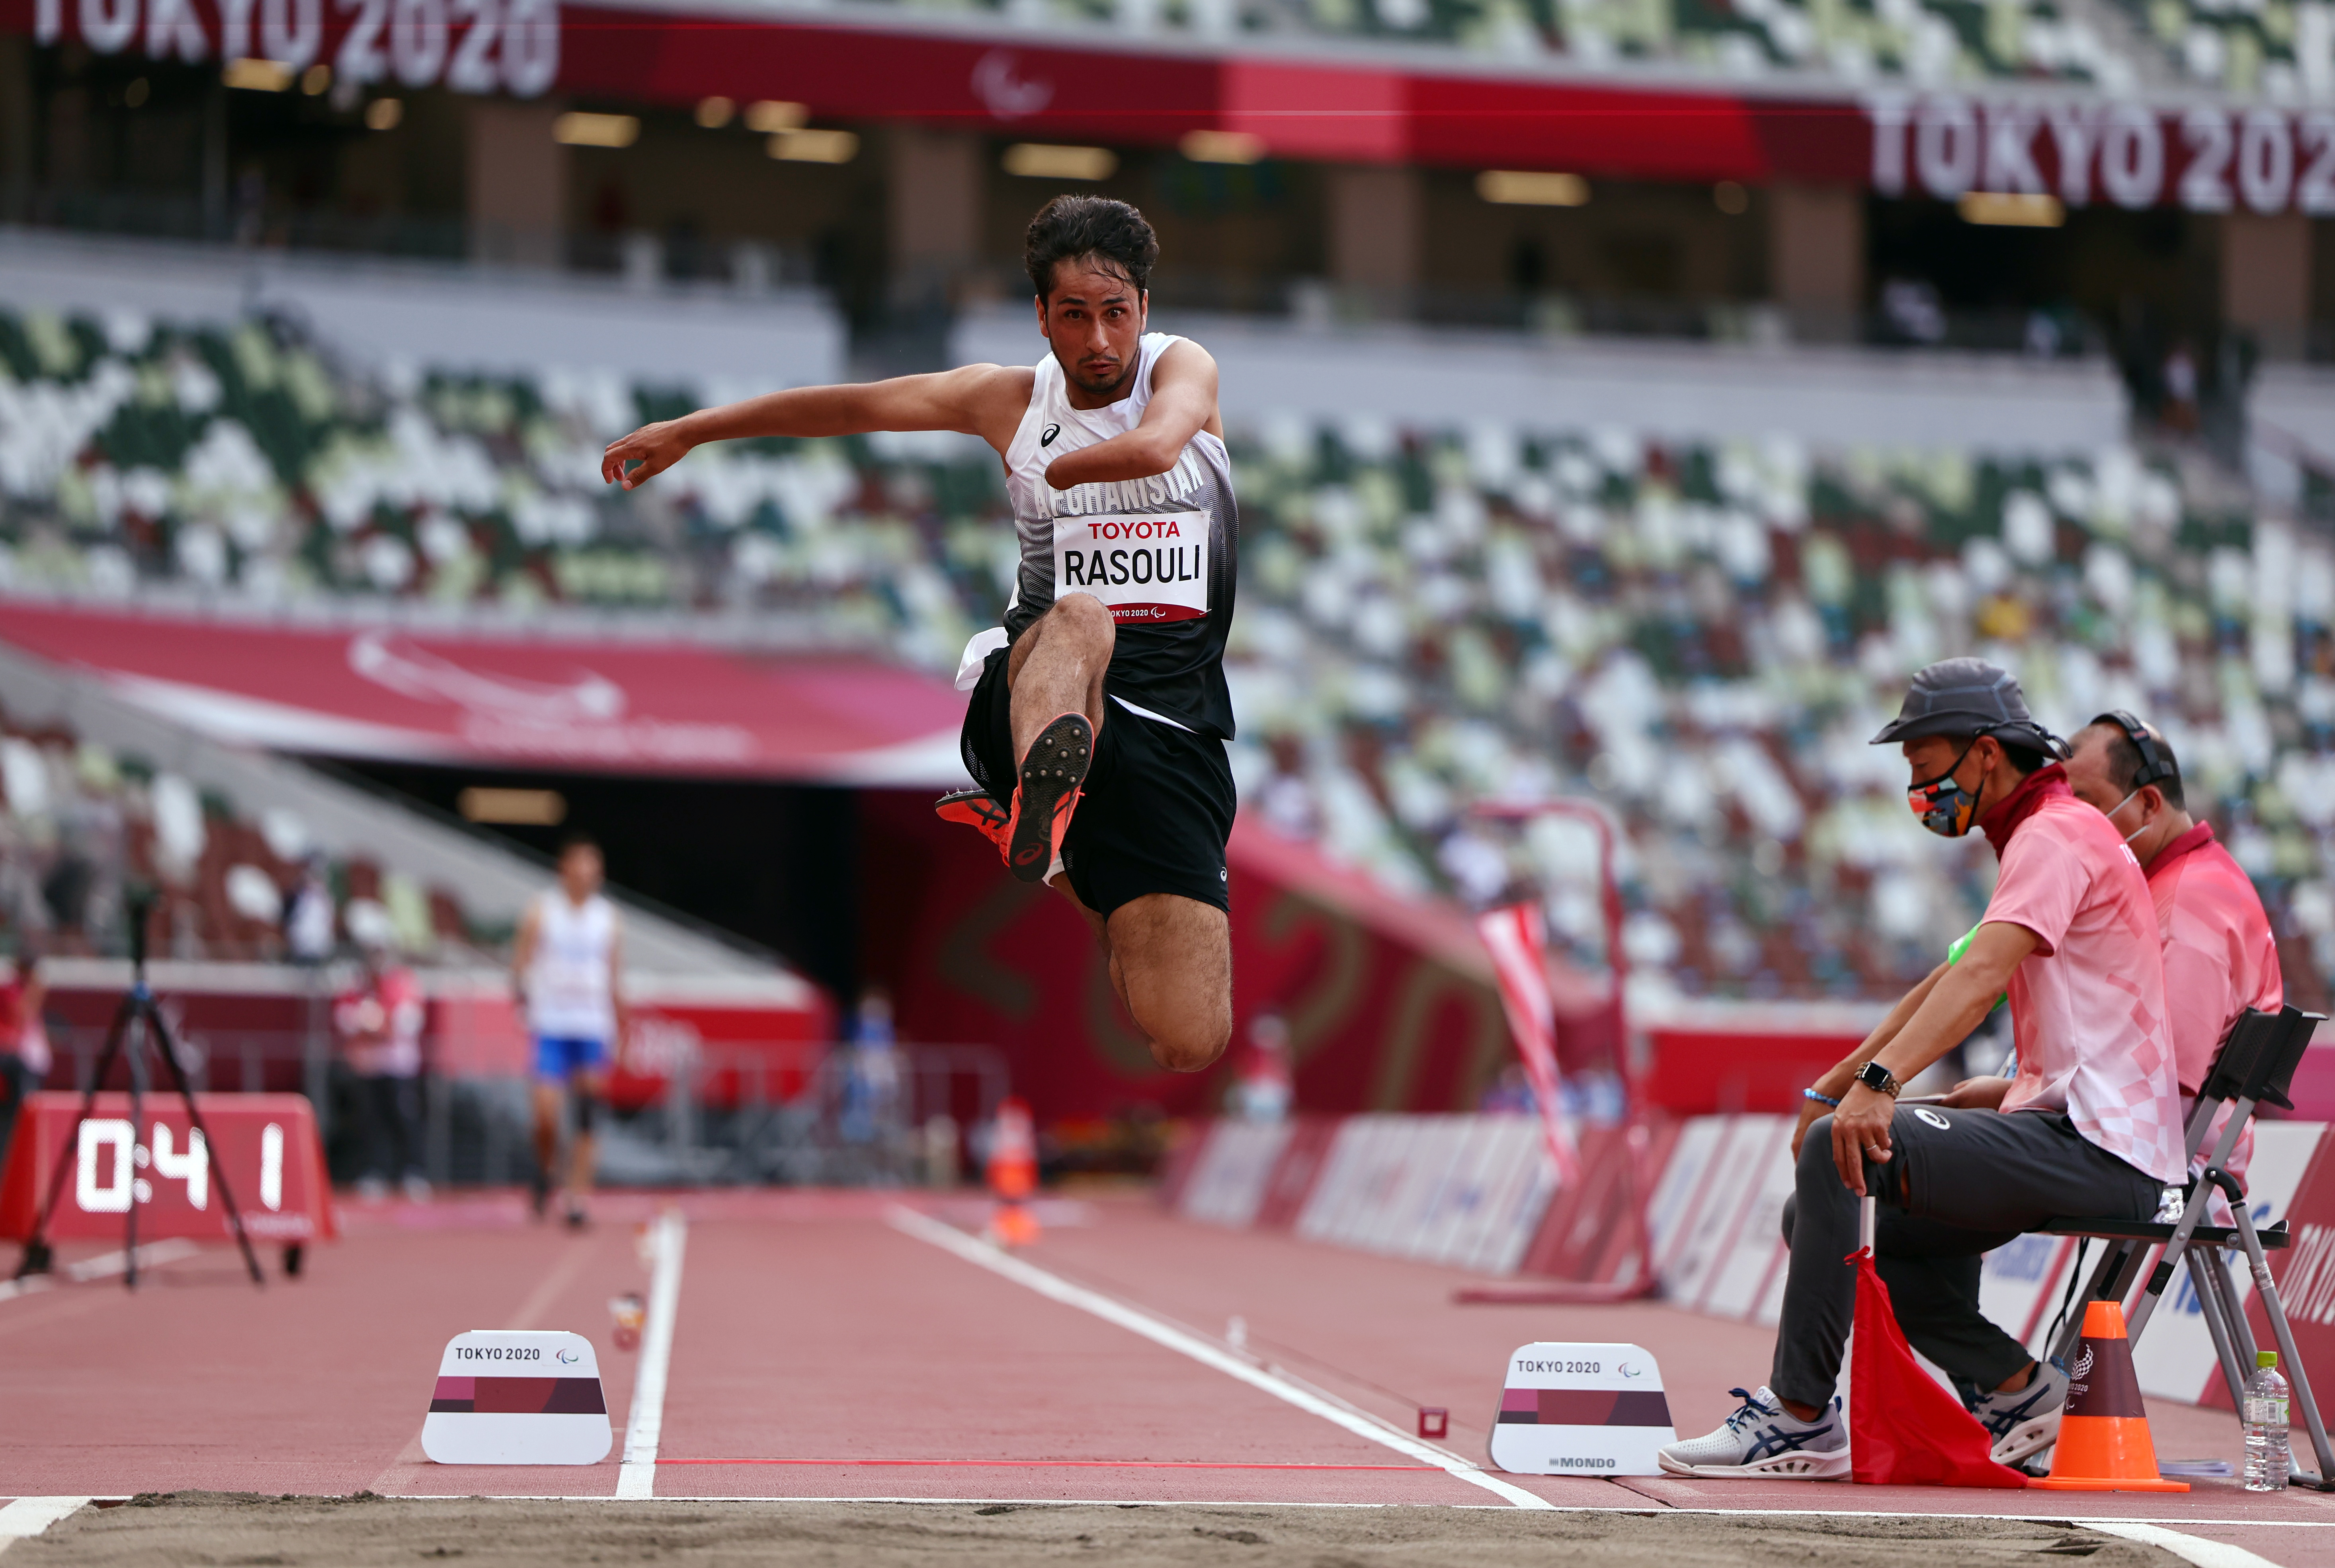 Tokyo 2020 Paralympic Games - Athletics - Men's Long Jump - T47 Final - Olympic Stadium, Tokyo, Japan - August 31, 2021. Hossain Rasouli of Afghanistan in action REUTERS/Athit Perawongmetha